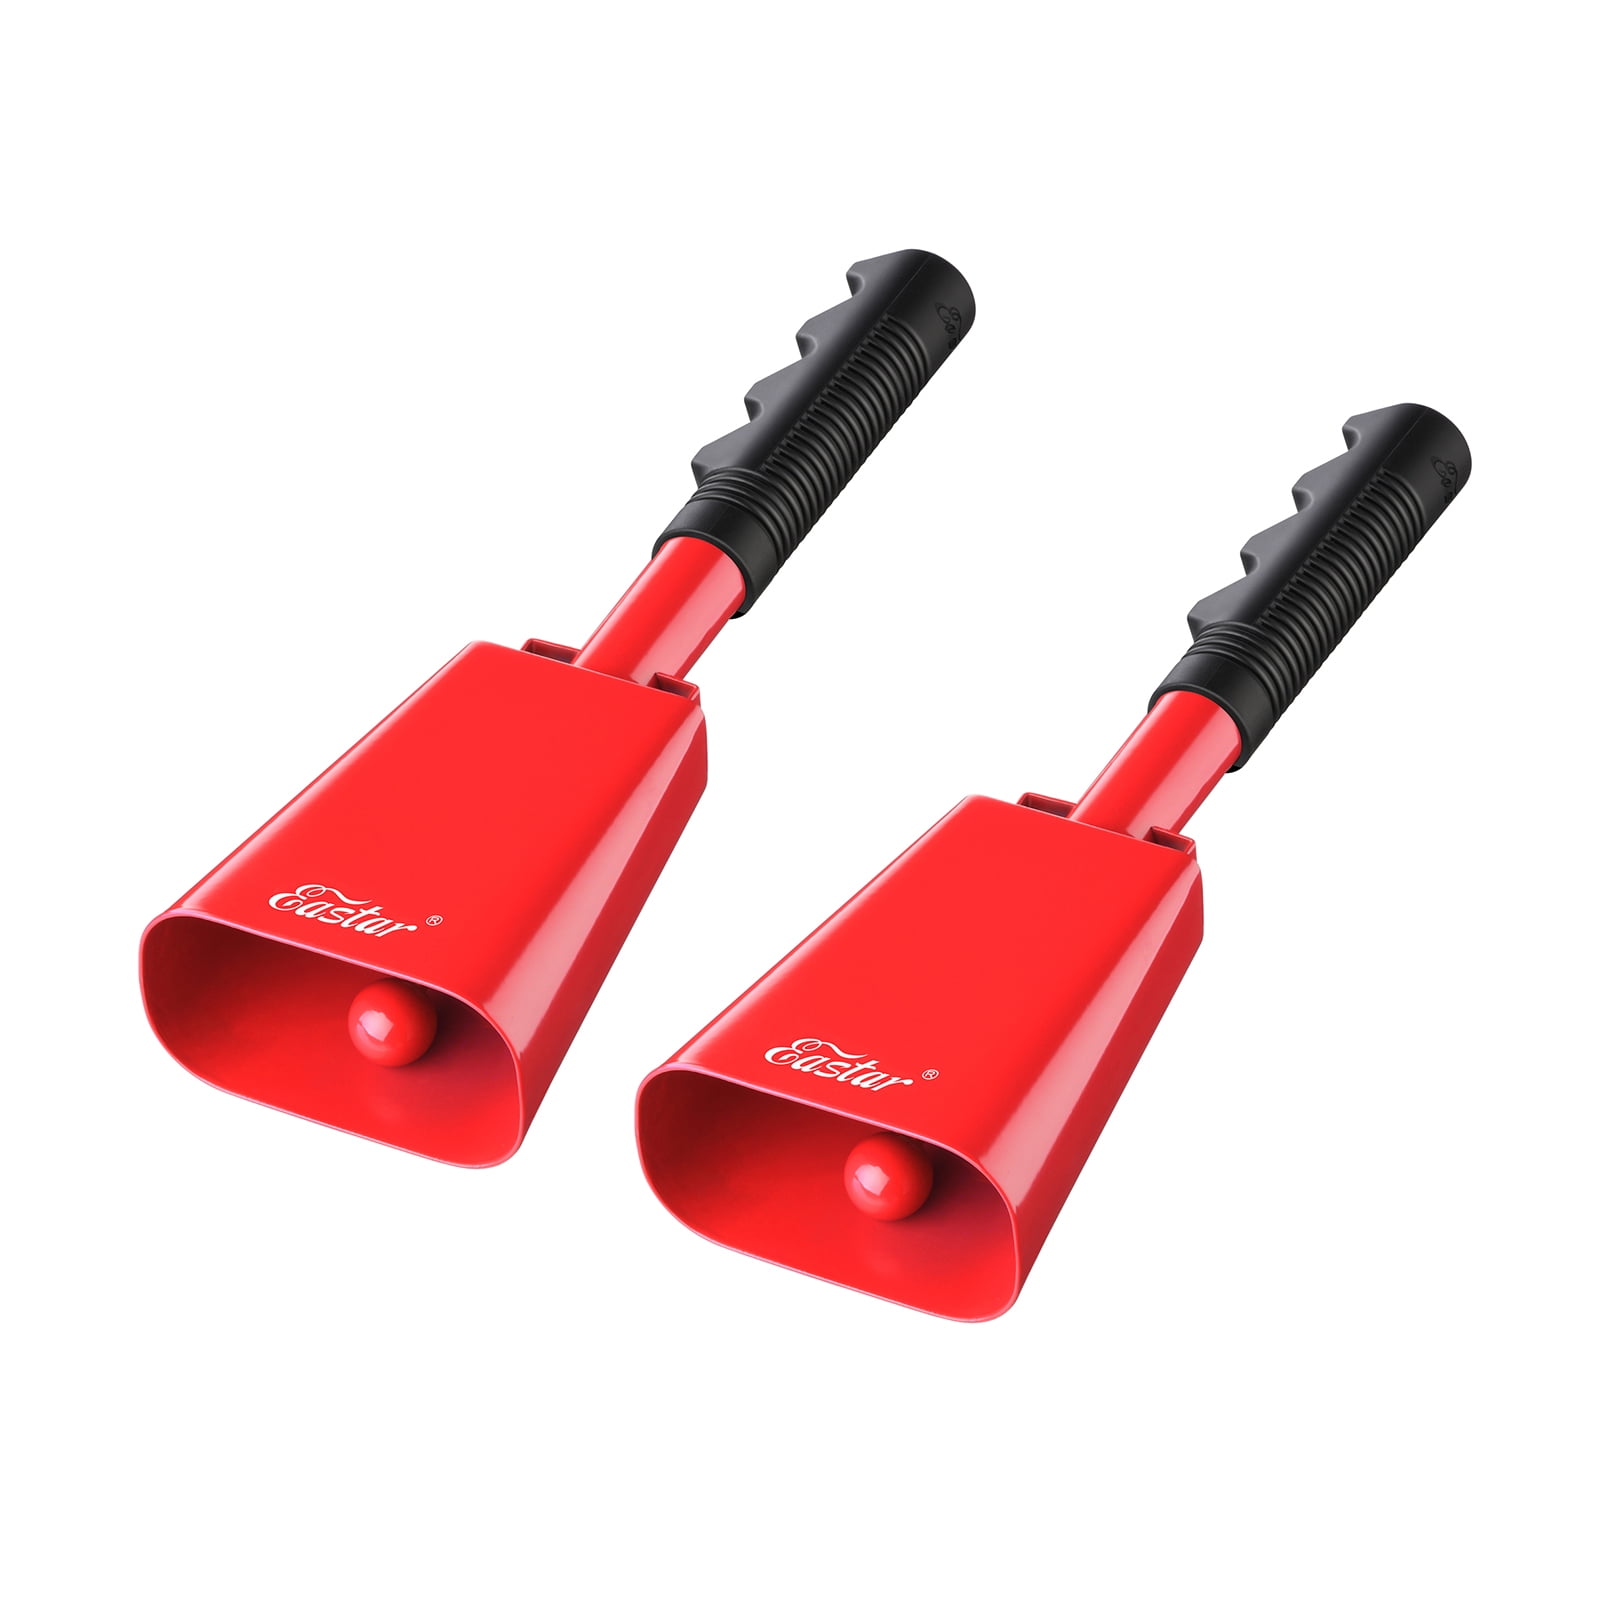  2 pack 10 in. steel cowbell/Noise makers with handles